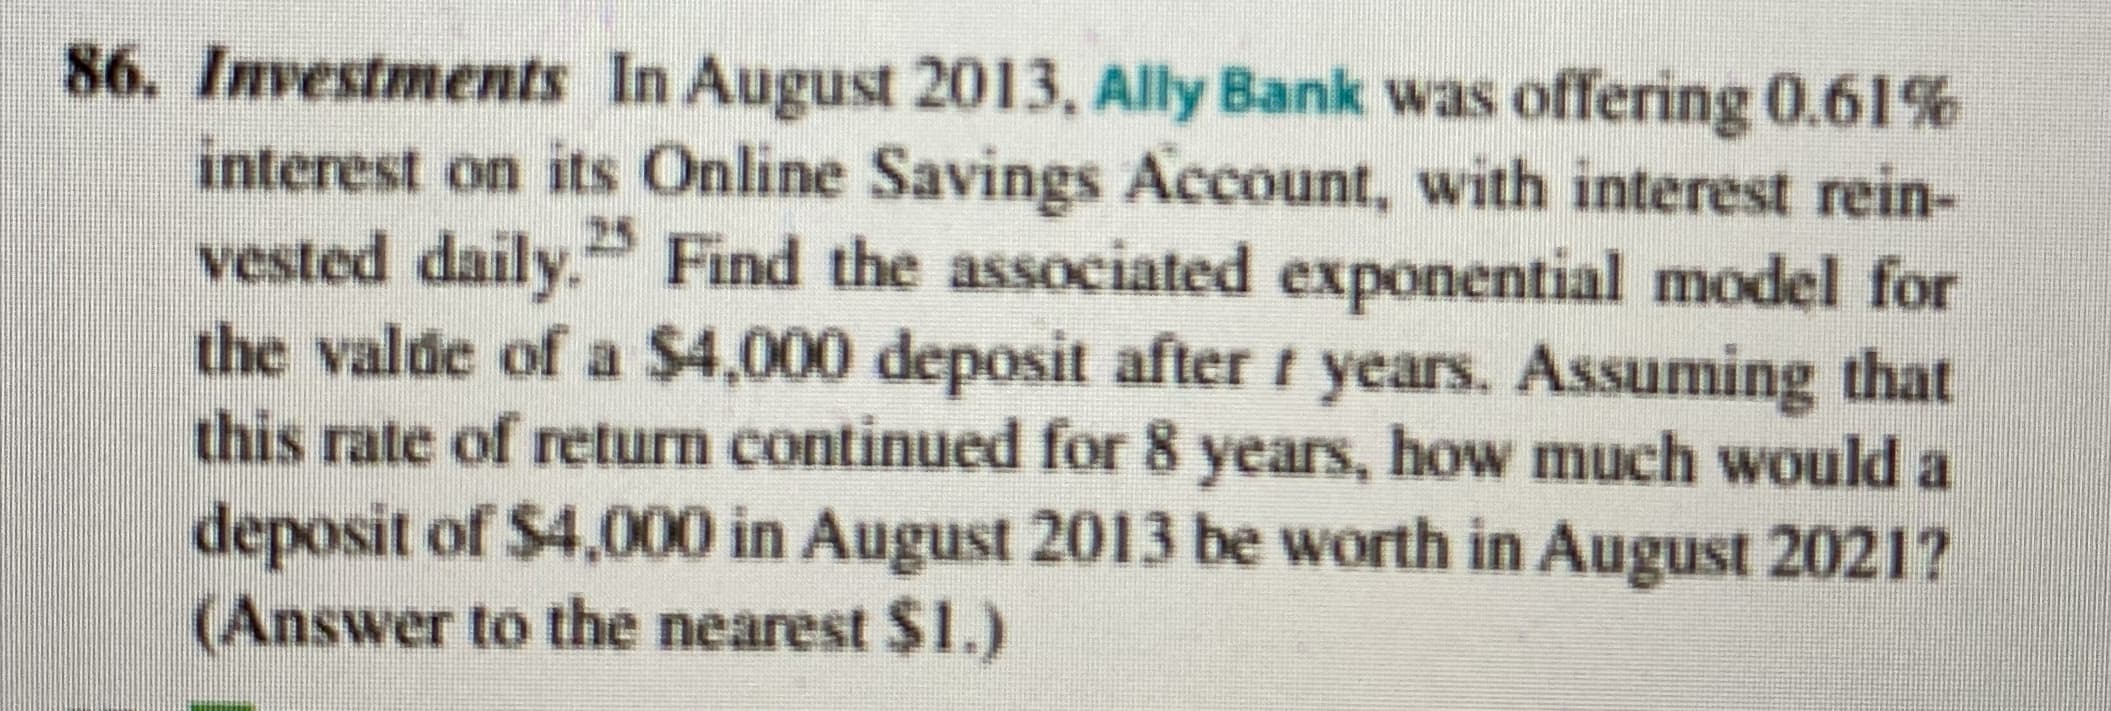 86. Investments In August 2013, Ally Bank was offering 0.61%
interest on its Online Savings Account, with interest rein-
vested daily. Find the associated exponential model for
the valde of a $4,000 deposit after t years. Assuming that
this rate of return continued for 8 years, how much would a
deposit of $4,000 in August 2013 be worth in August 2021?
(Answer to the nearest $1.)
25
